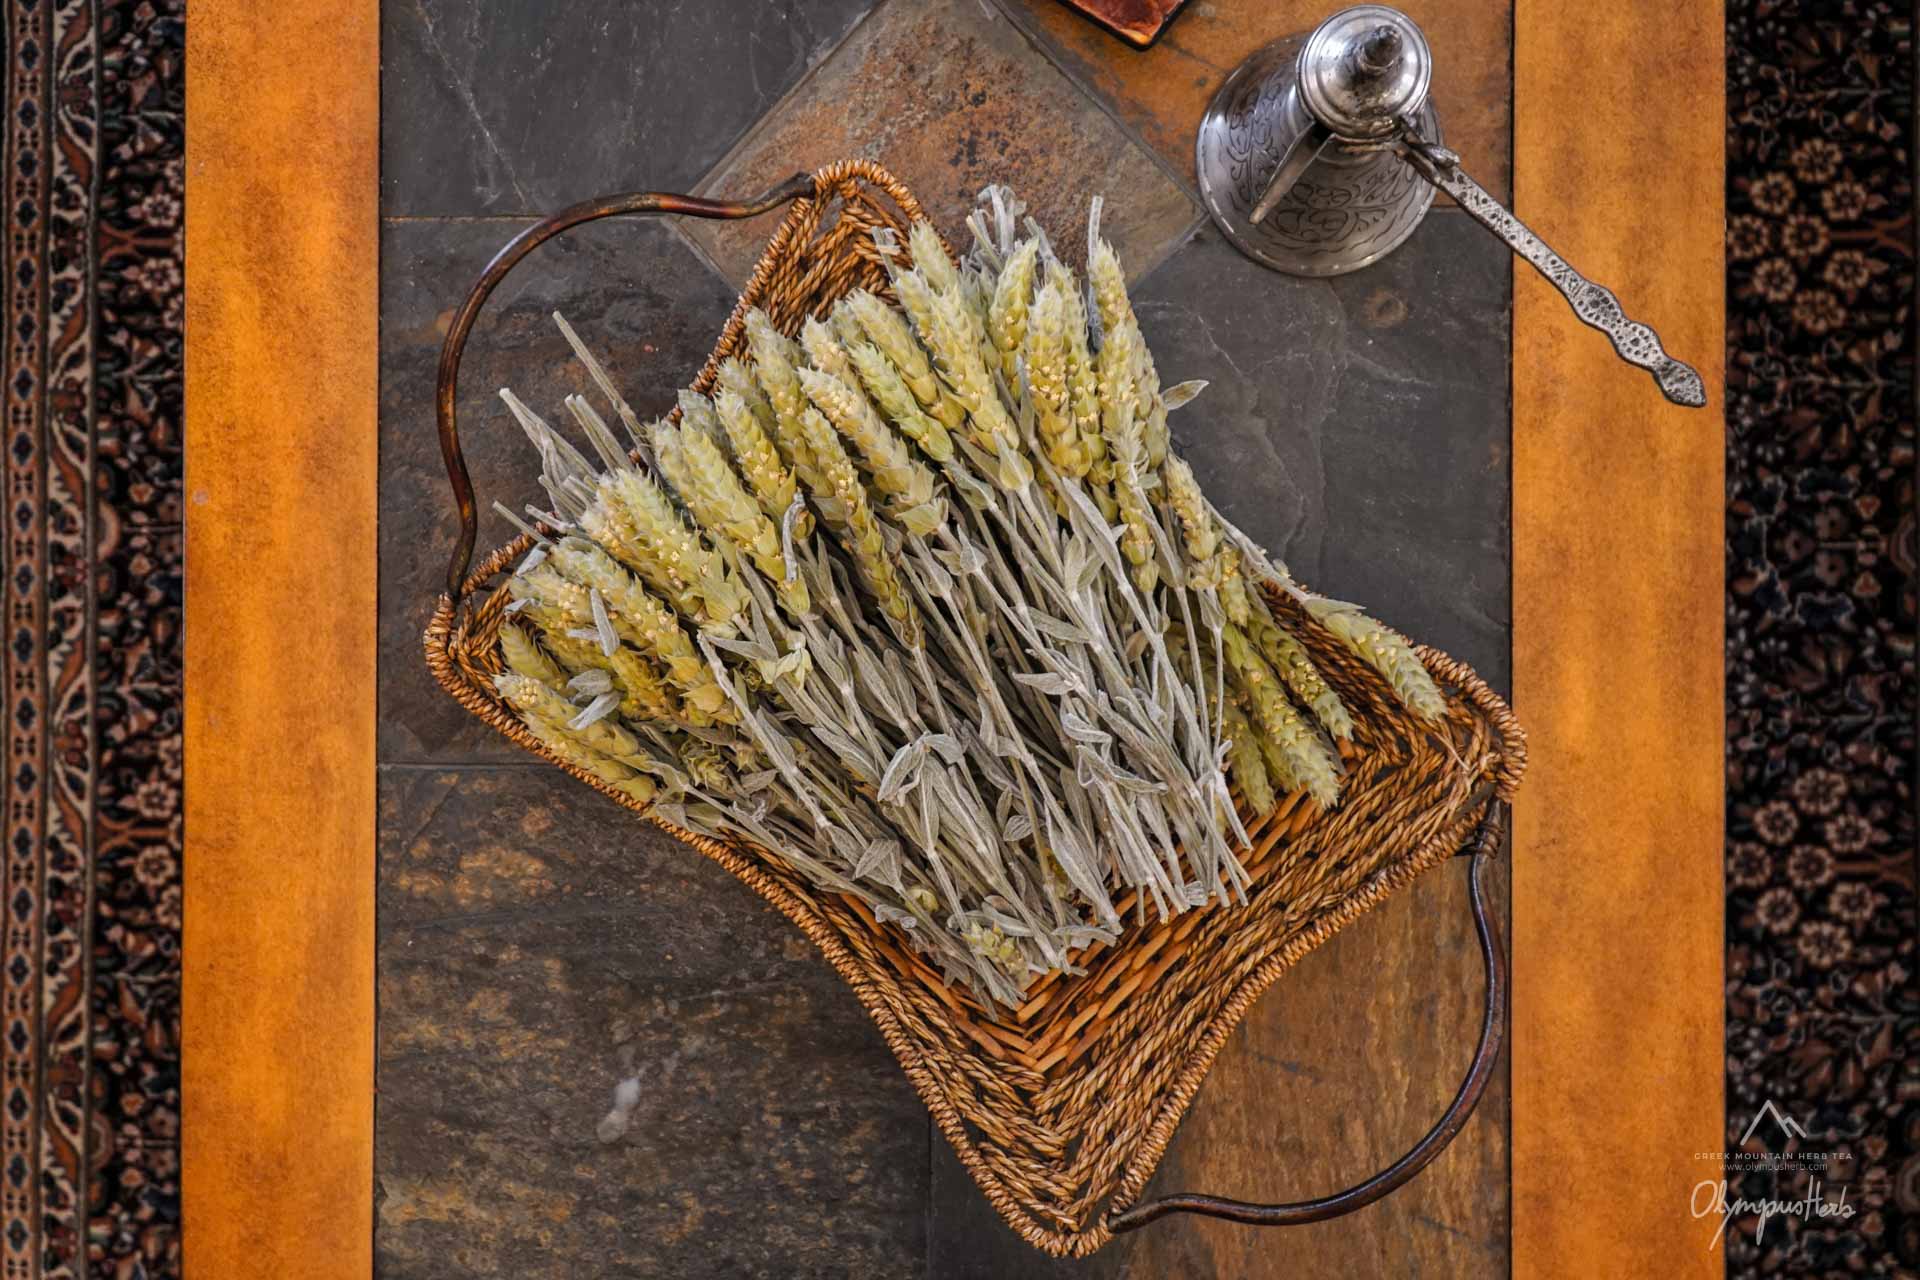 Olympus Herb / Sideritis Scardica herb at the purest form, hand picked and naturally dried.